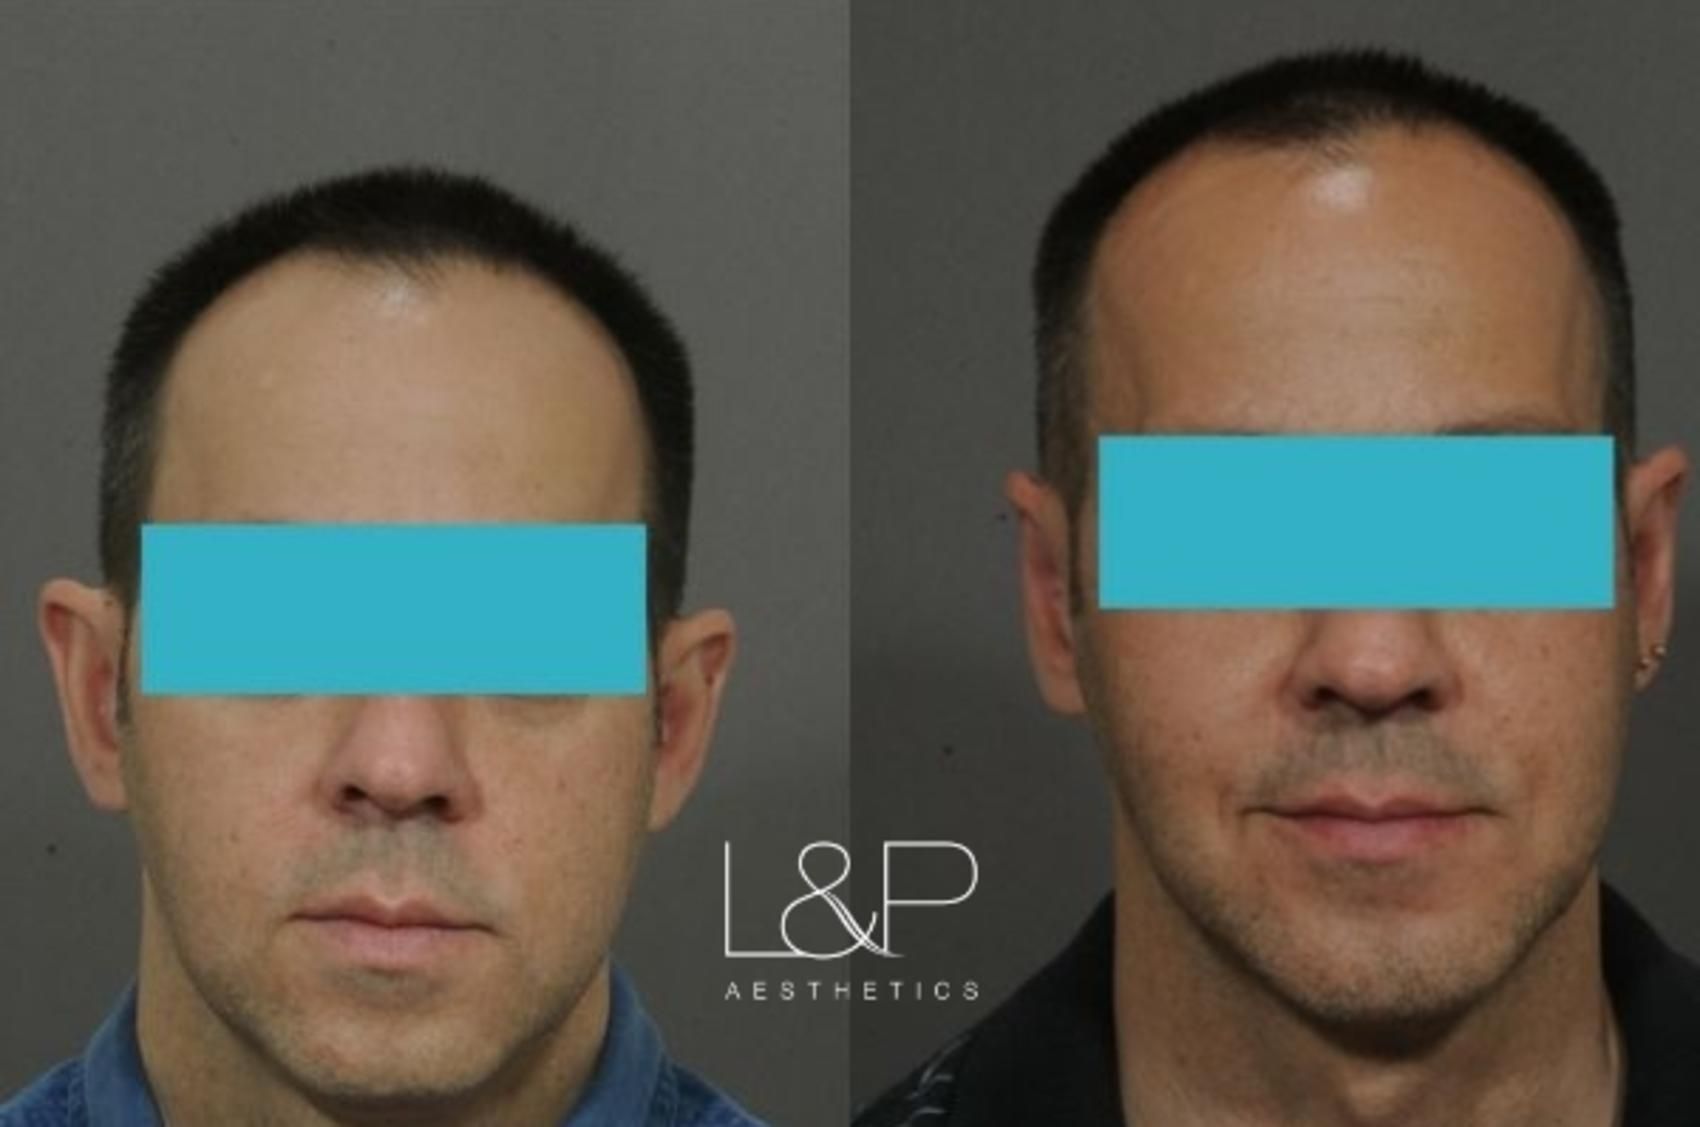 Otoplasty before and after treatment